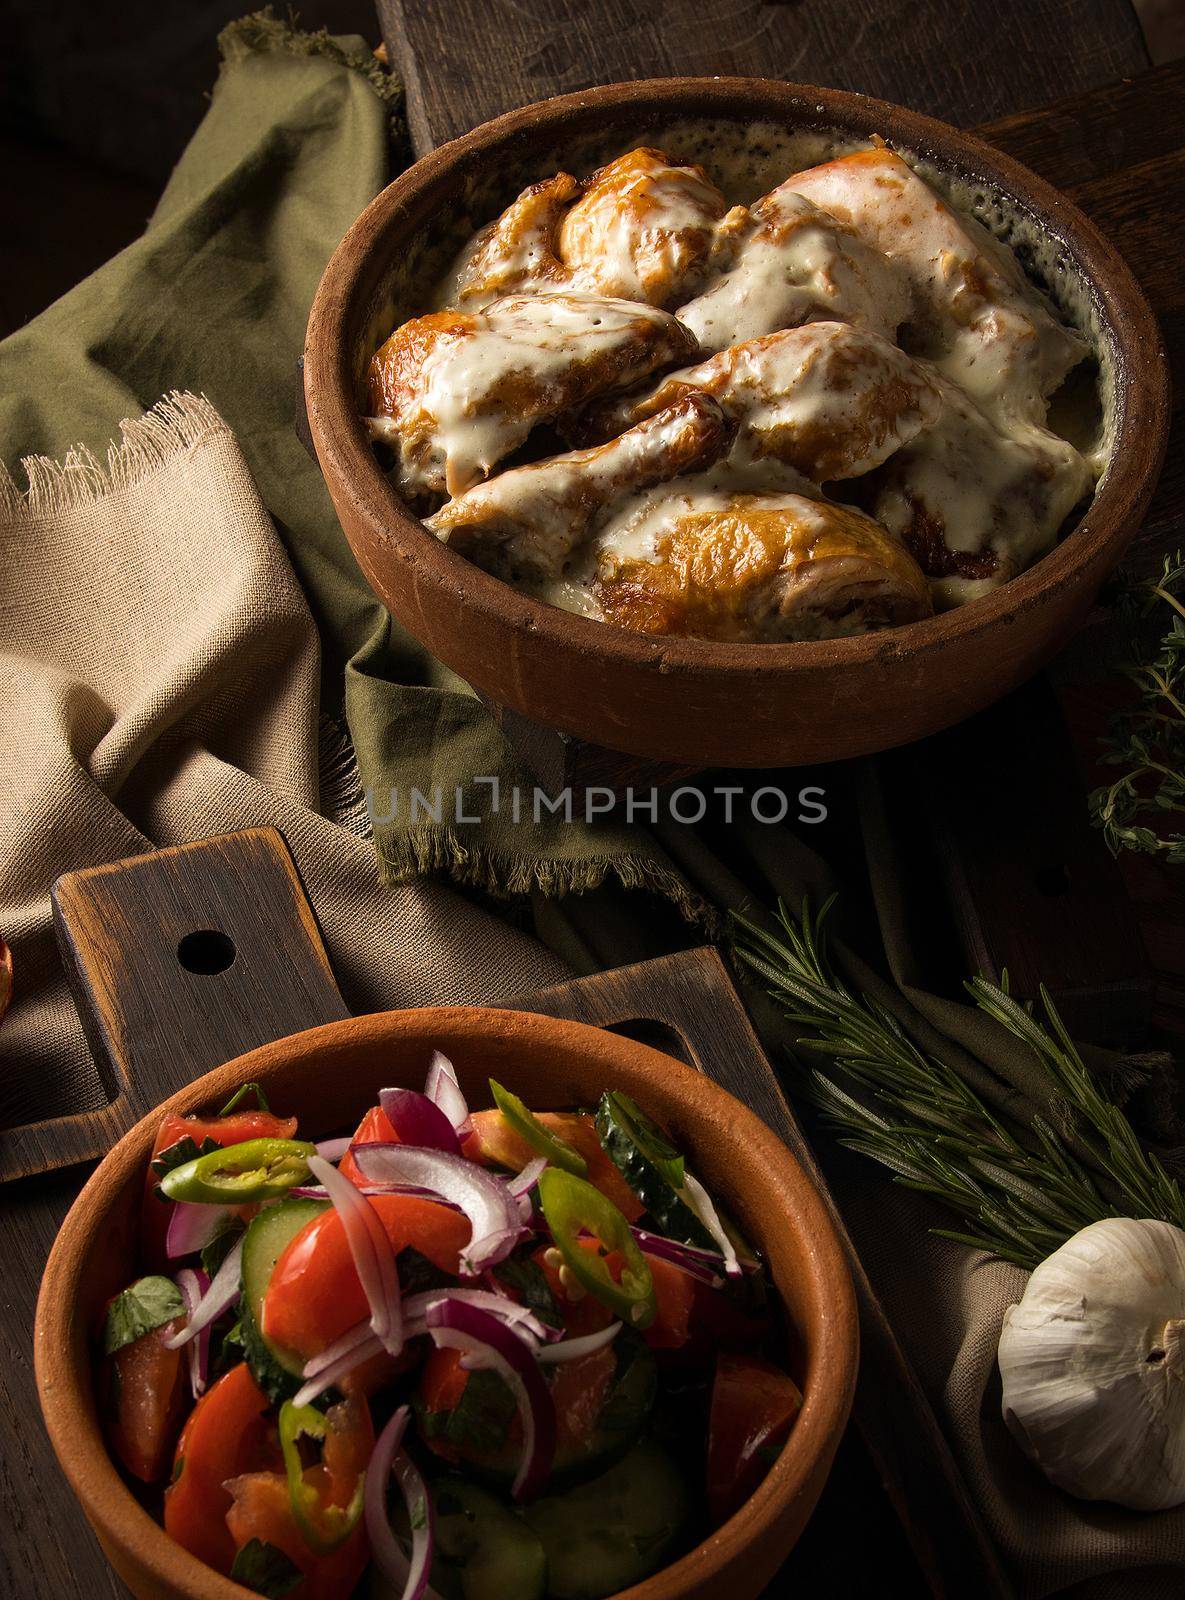 A vertical shot of a chicken covered in creamy sauce and eggplant salad